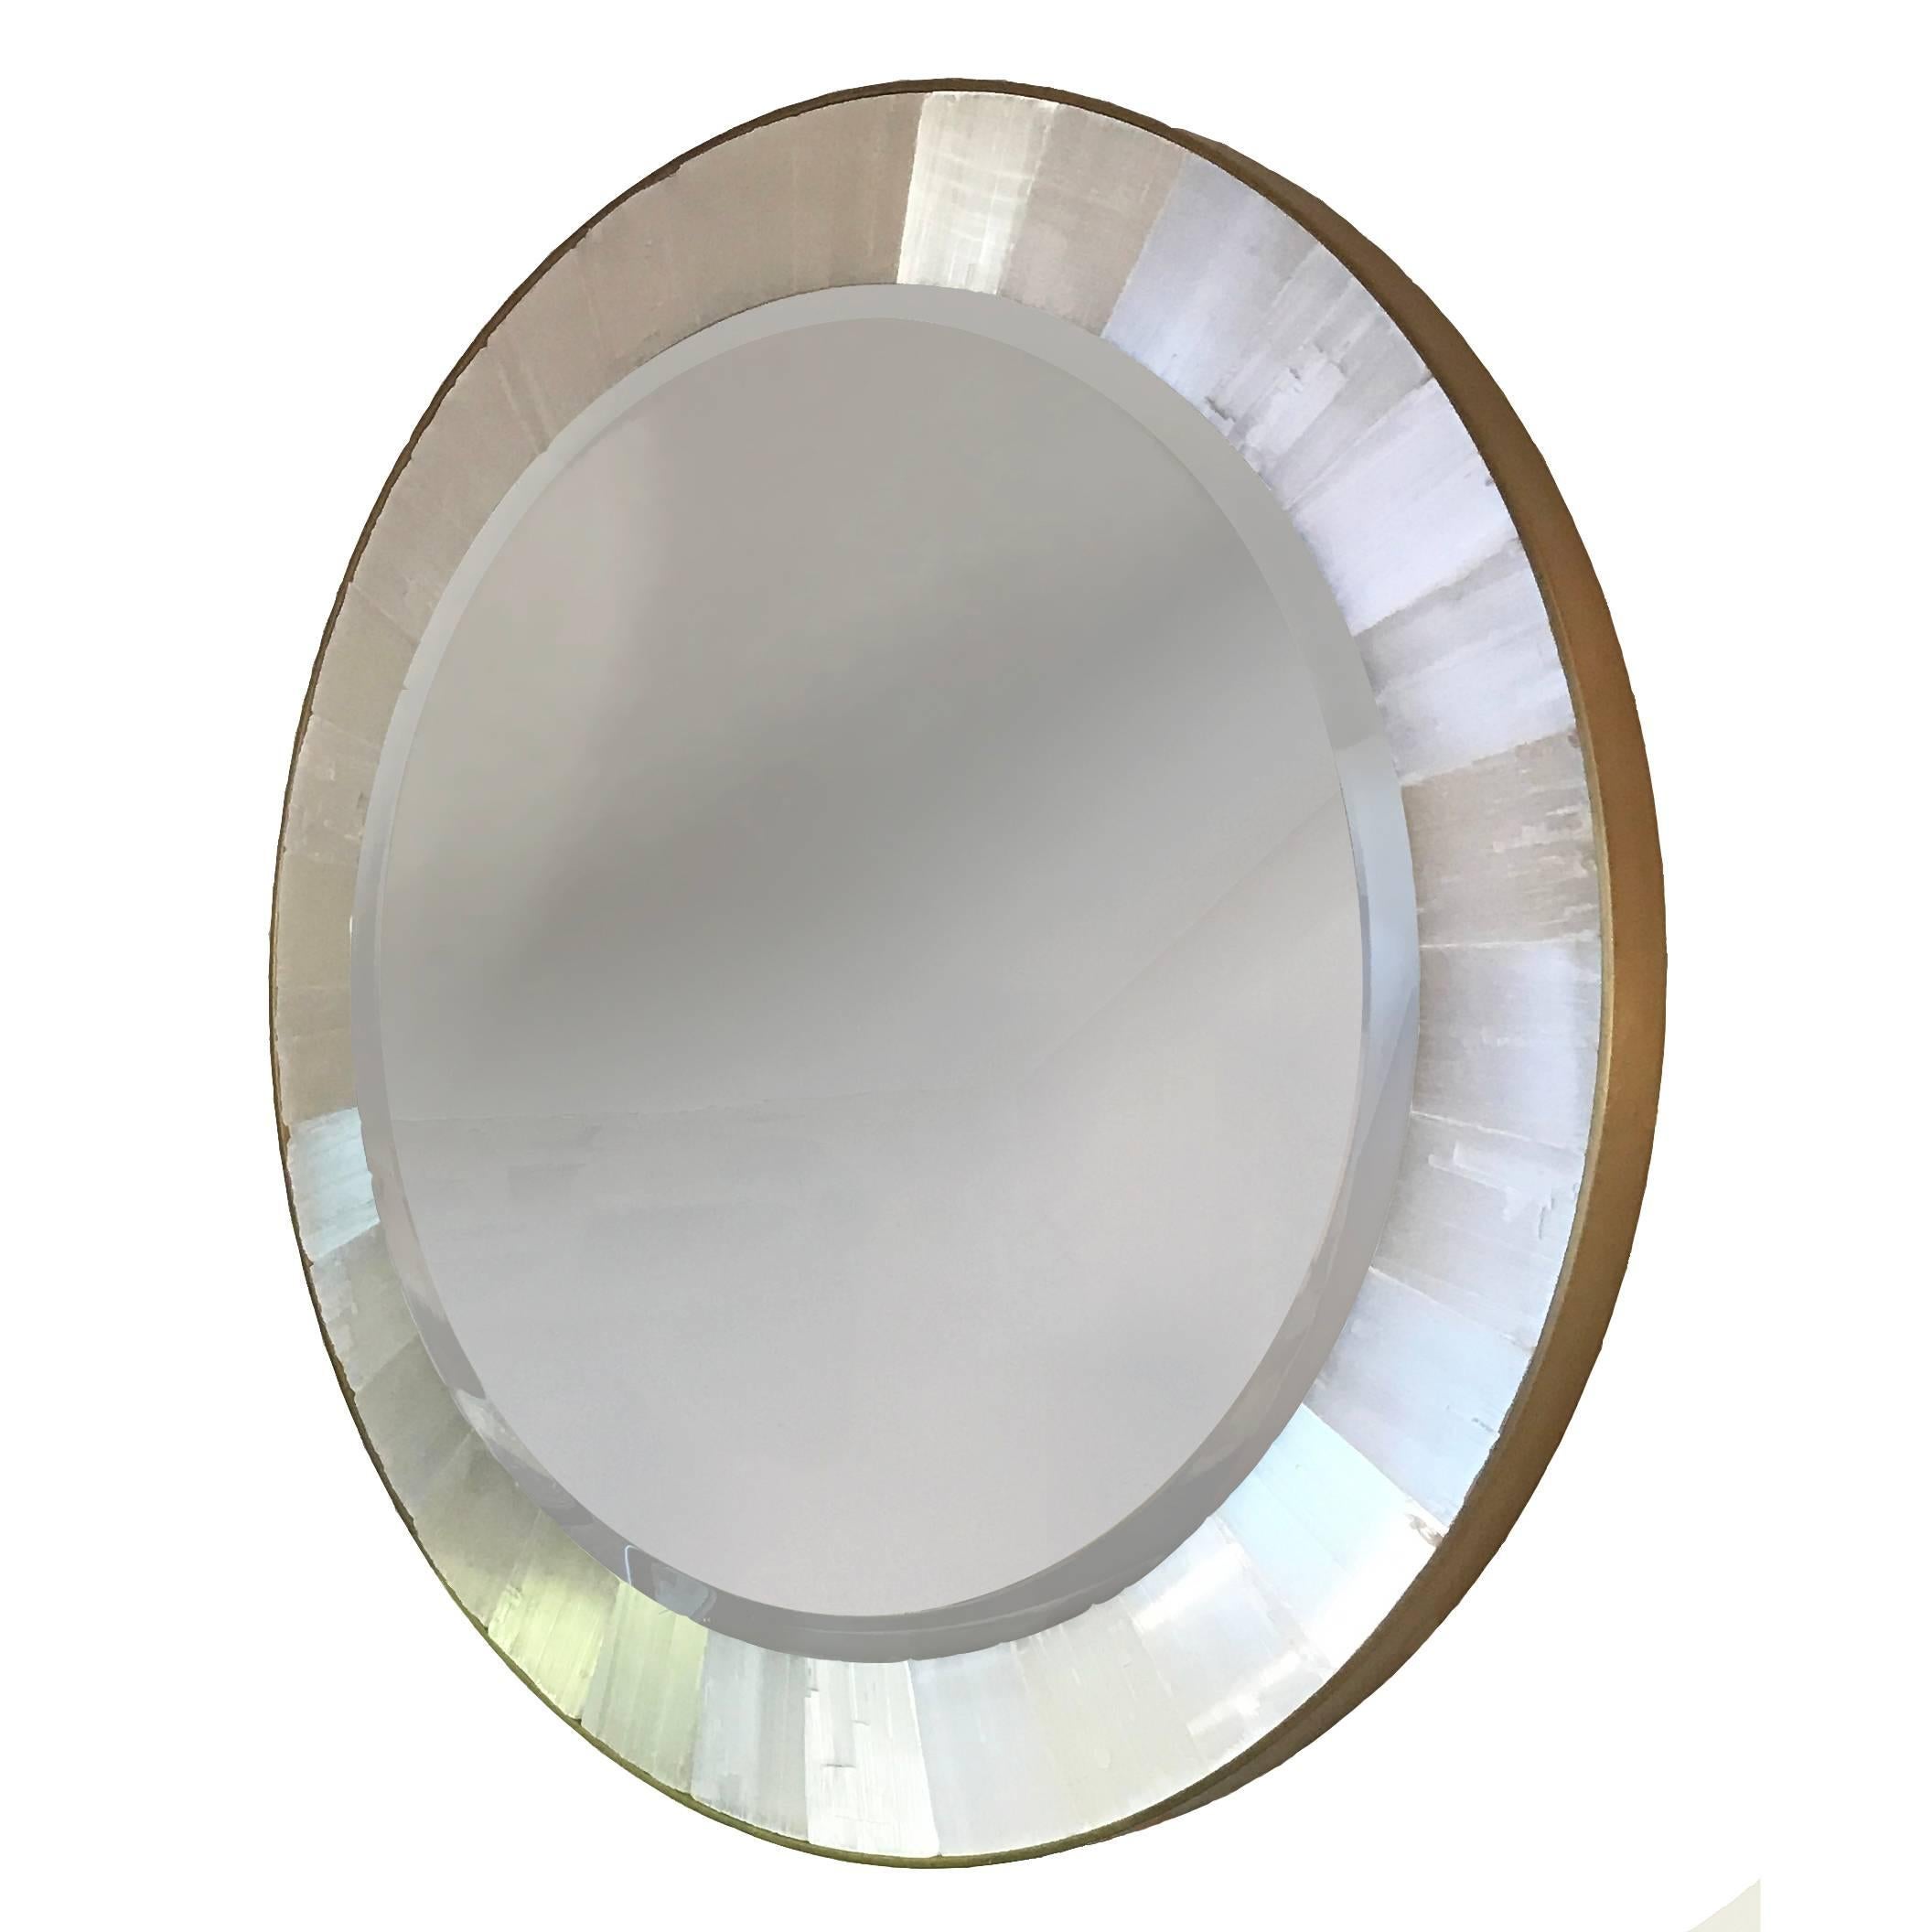 Luminous, snowy gypsum and shining brass frame seamlessly frame a beveled mirror. Circular shaped perfect for a powder or dressing room, custom shapes and sizes available, as well as electrical hard-wiring for internal illumination. Date of creation